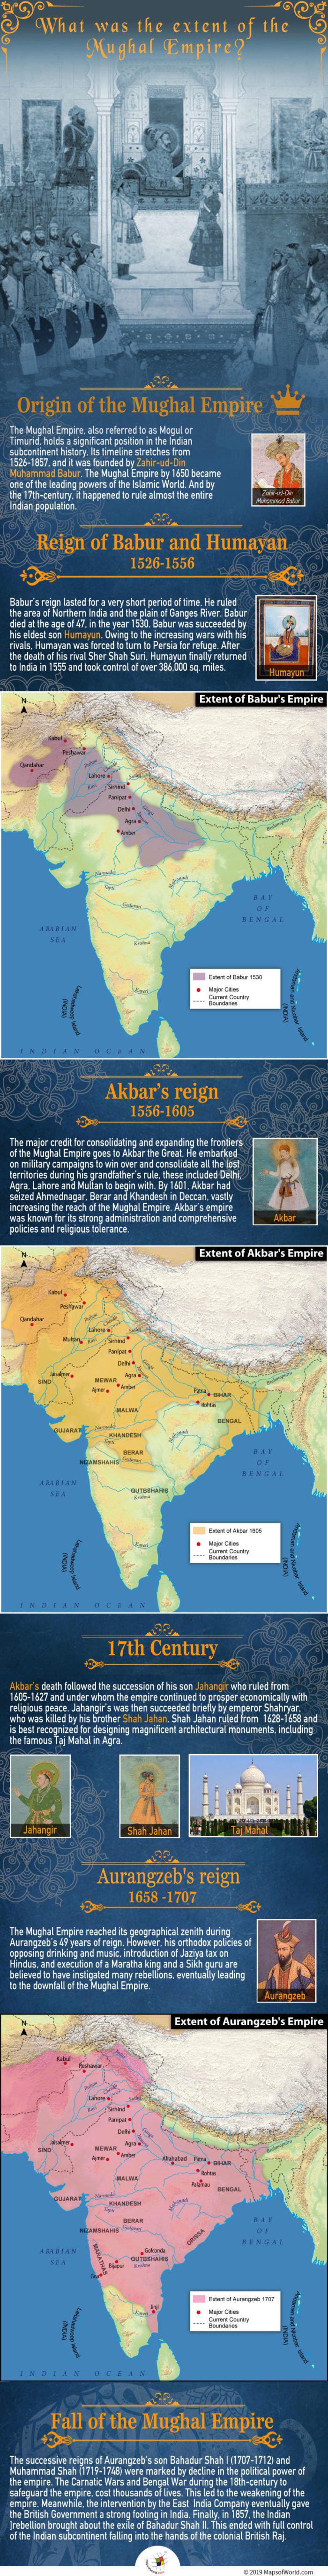 What was the Extent of the Mughal Empire?